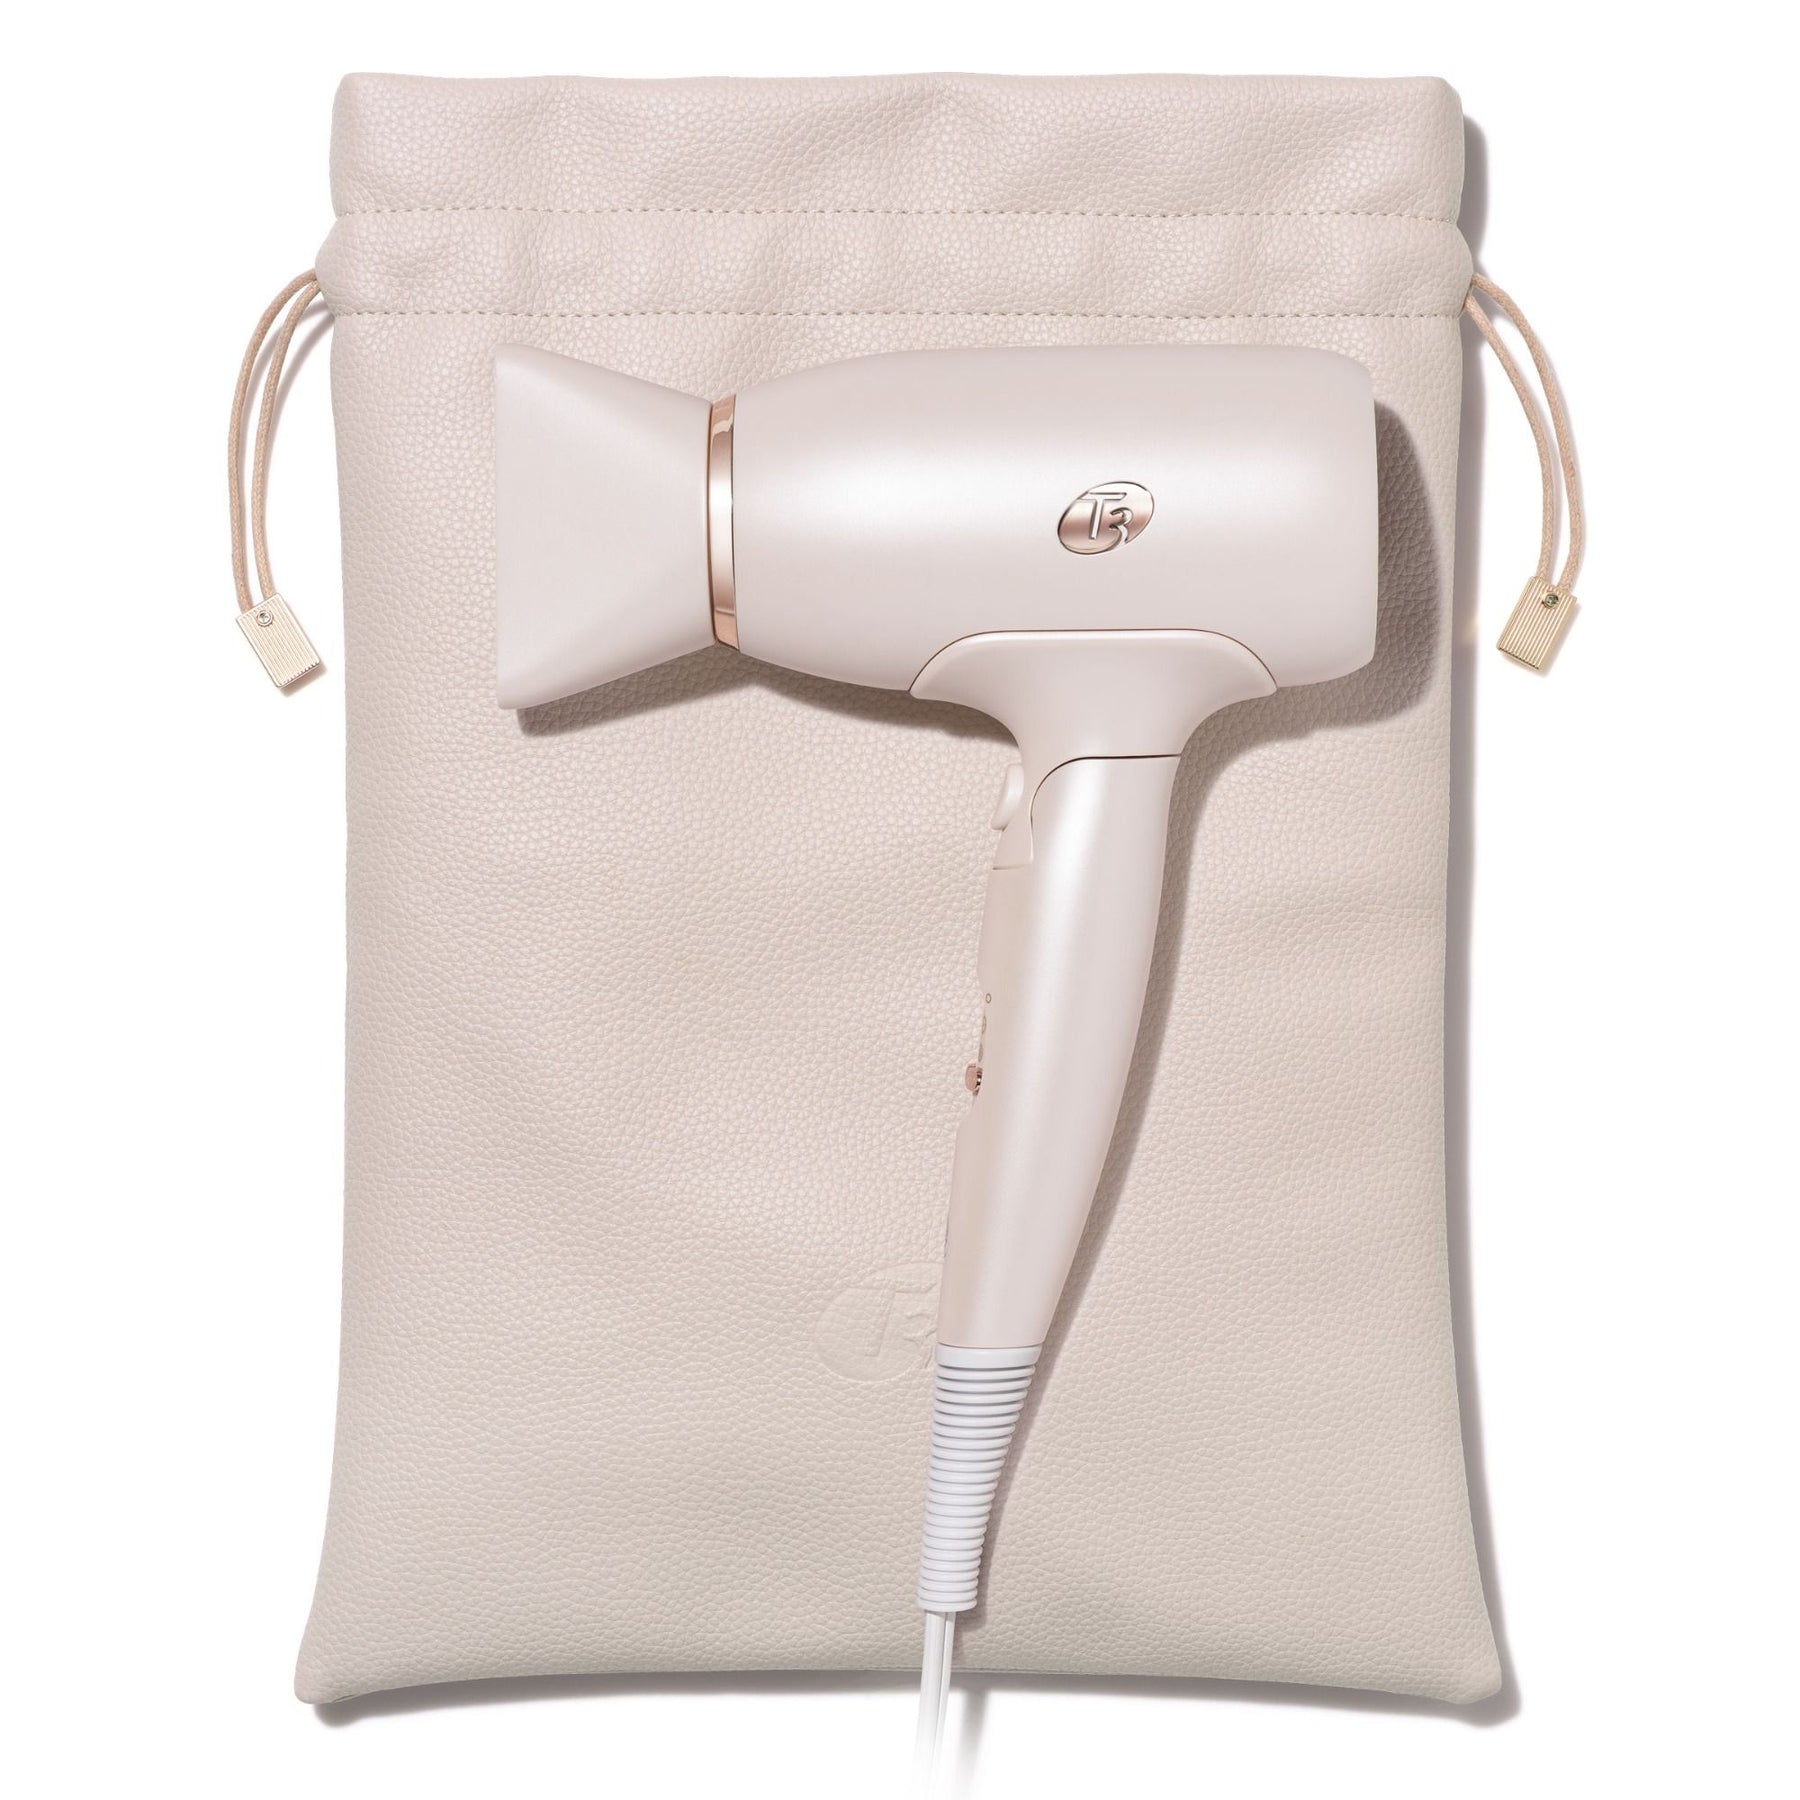 T3 Afar Travel Dryer Side view with Pouch